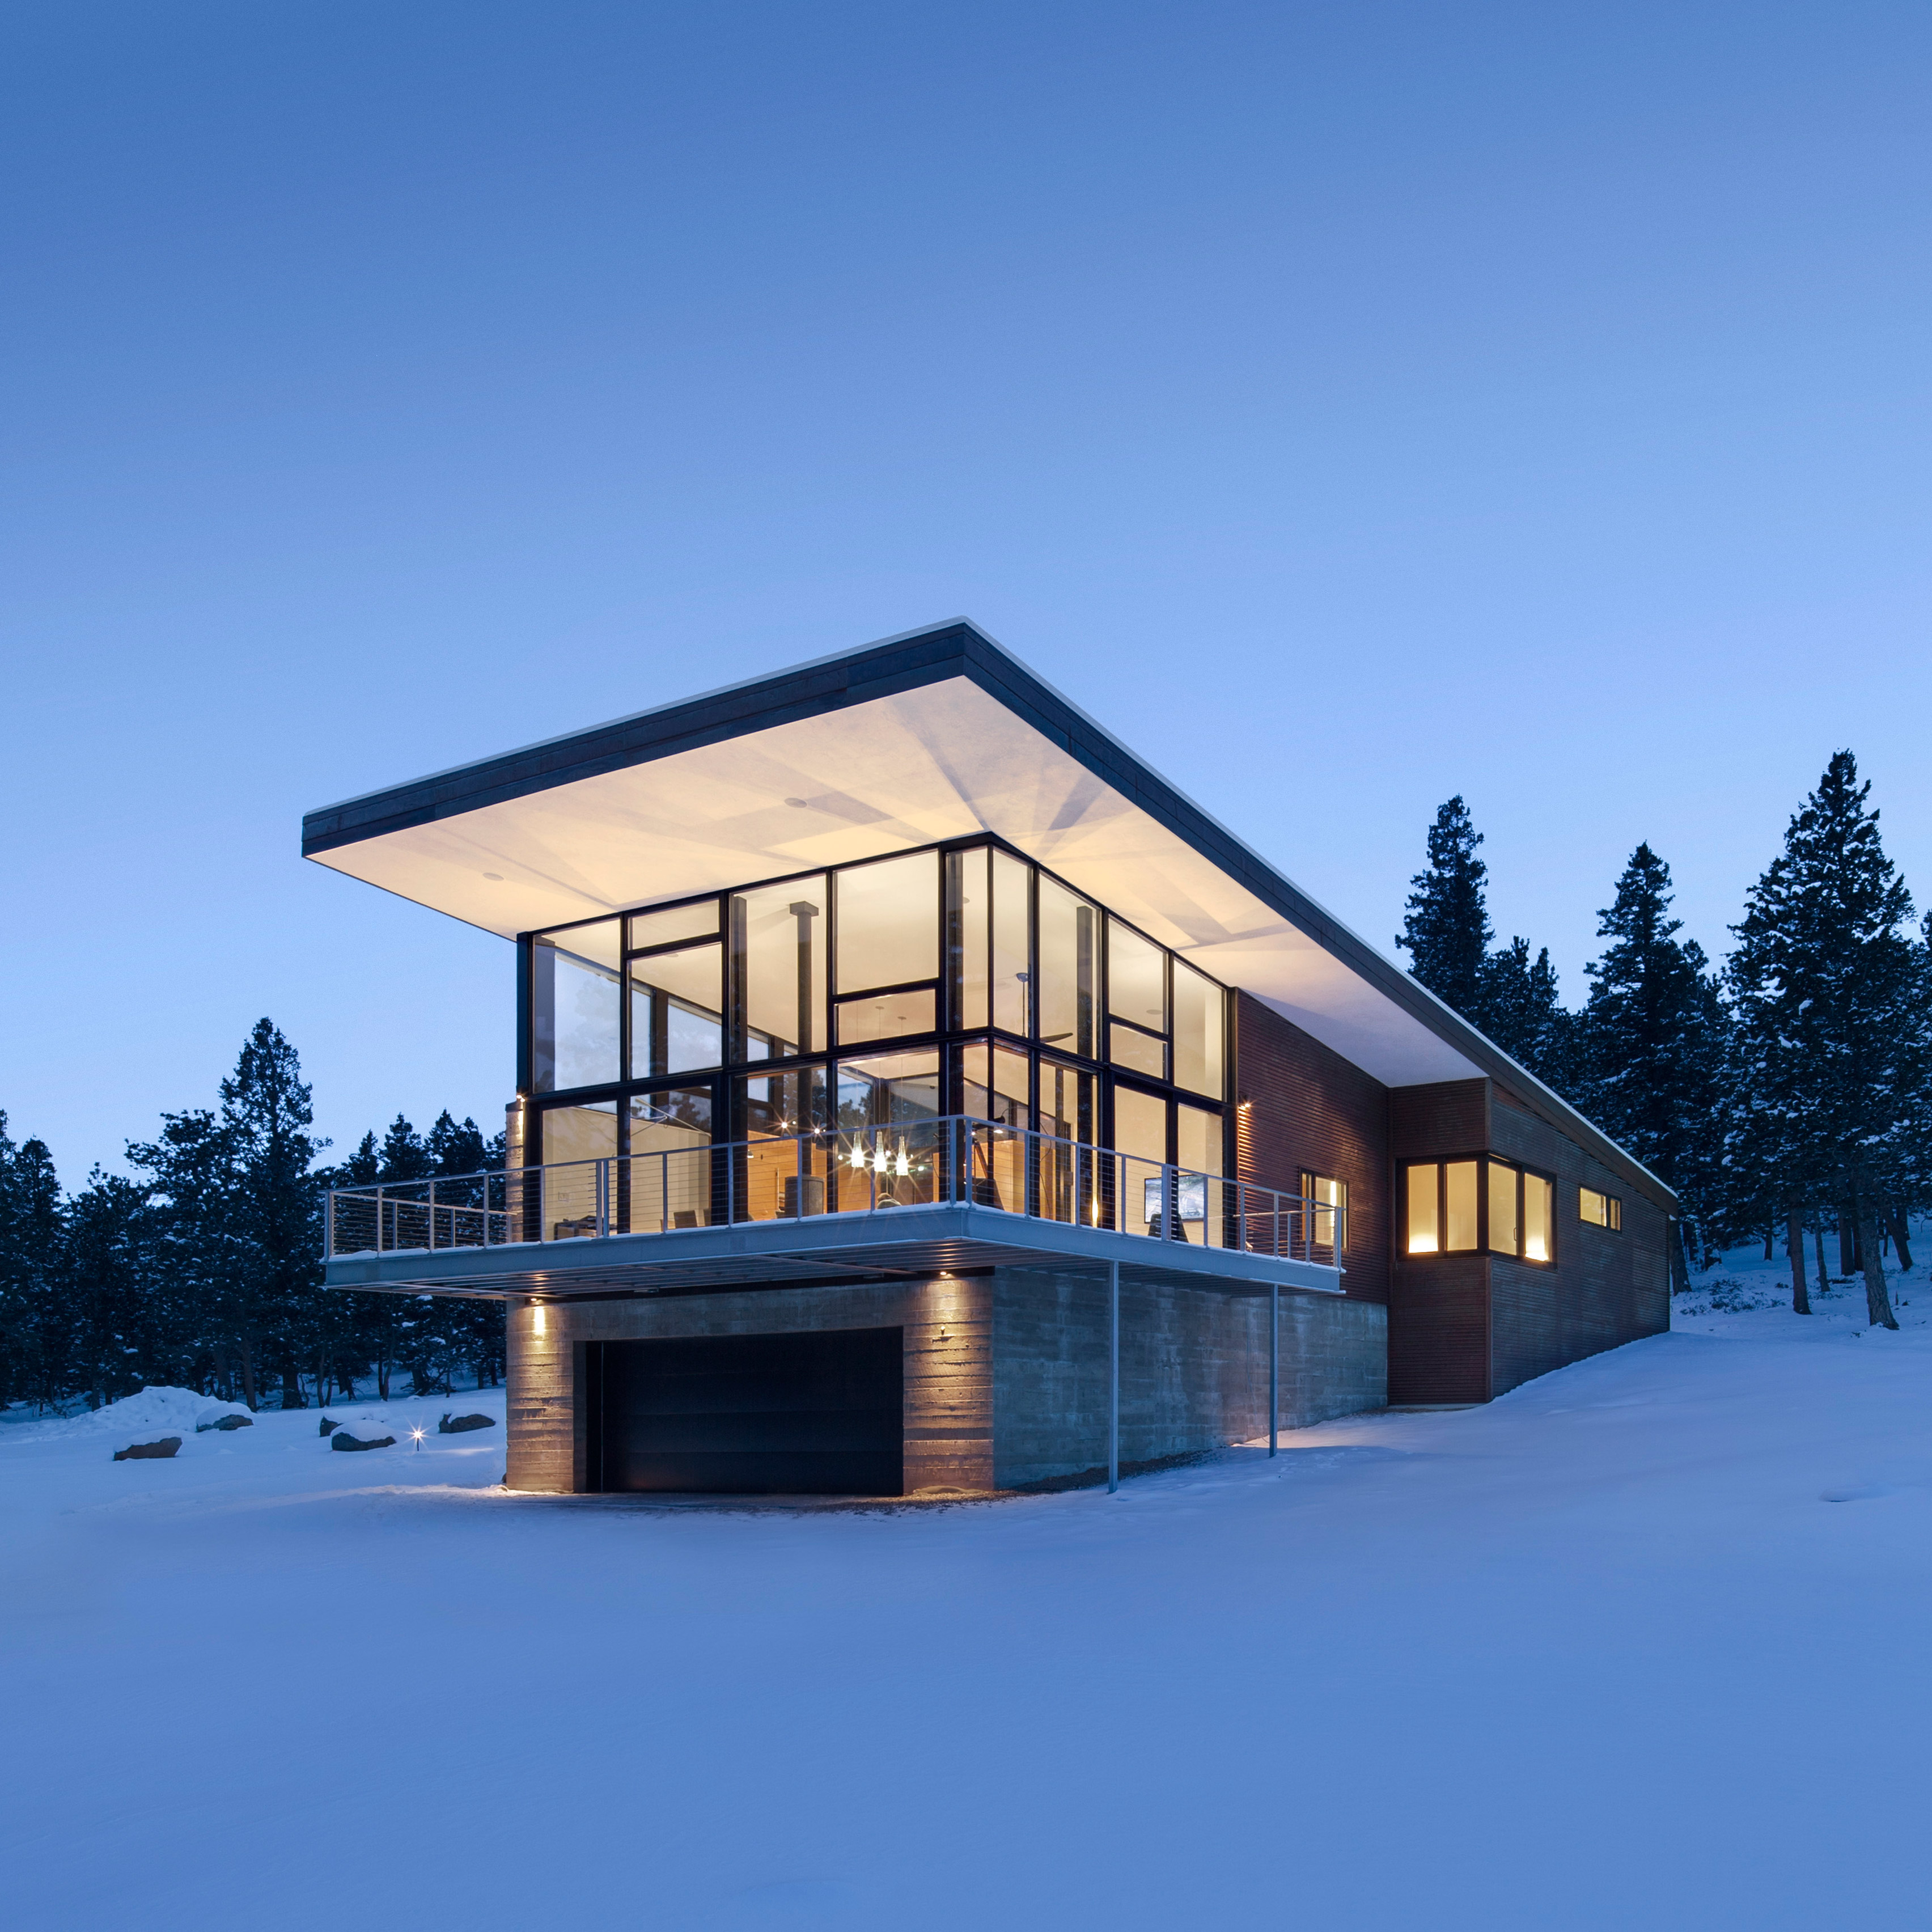 Lodgepole Retreat by Arch11